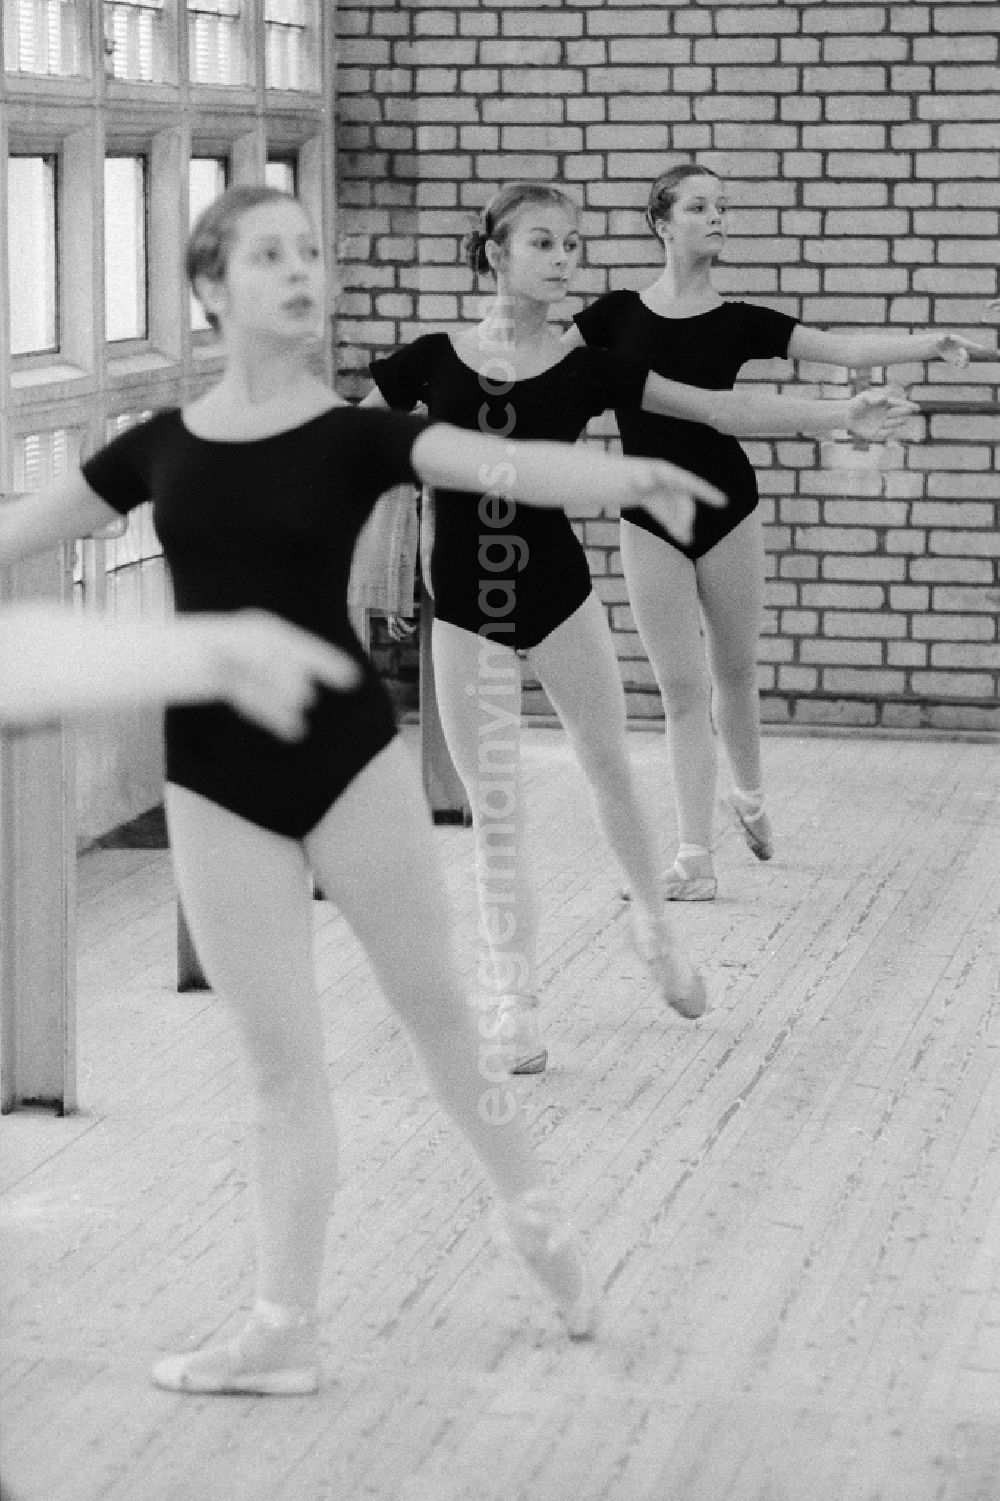 GDR image archive: Berlin - Ballet lessons in the state ballet school and school for acrobatics in Berlin, the former capital of the GDR, German democratic republic